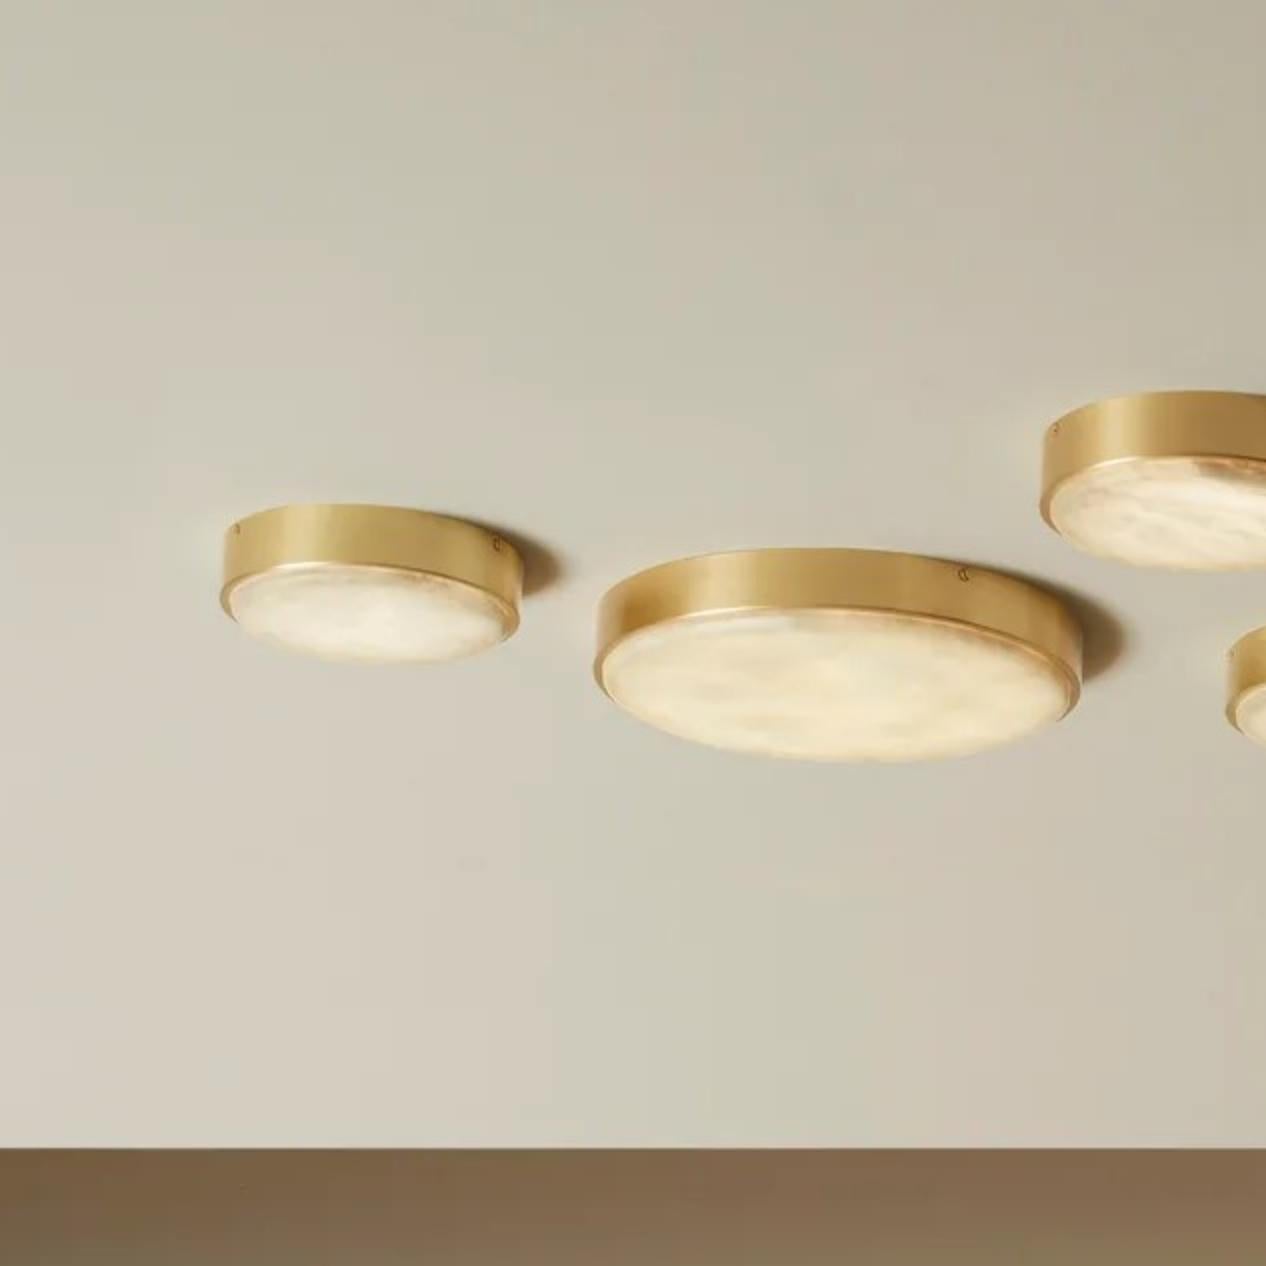 Anvers medium wall/ceiling lamp by CTO Lighting
Materials: satin brass with alabaster stone
Also available in bronze with alabaster stone
Dimensions: H 4.8 x W 33.5 cm 

All our lamps can be wired according to each country. If sold to the USA it